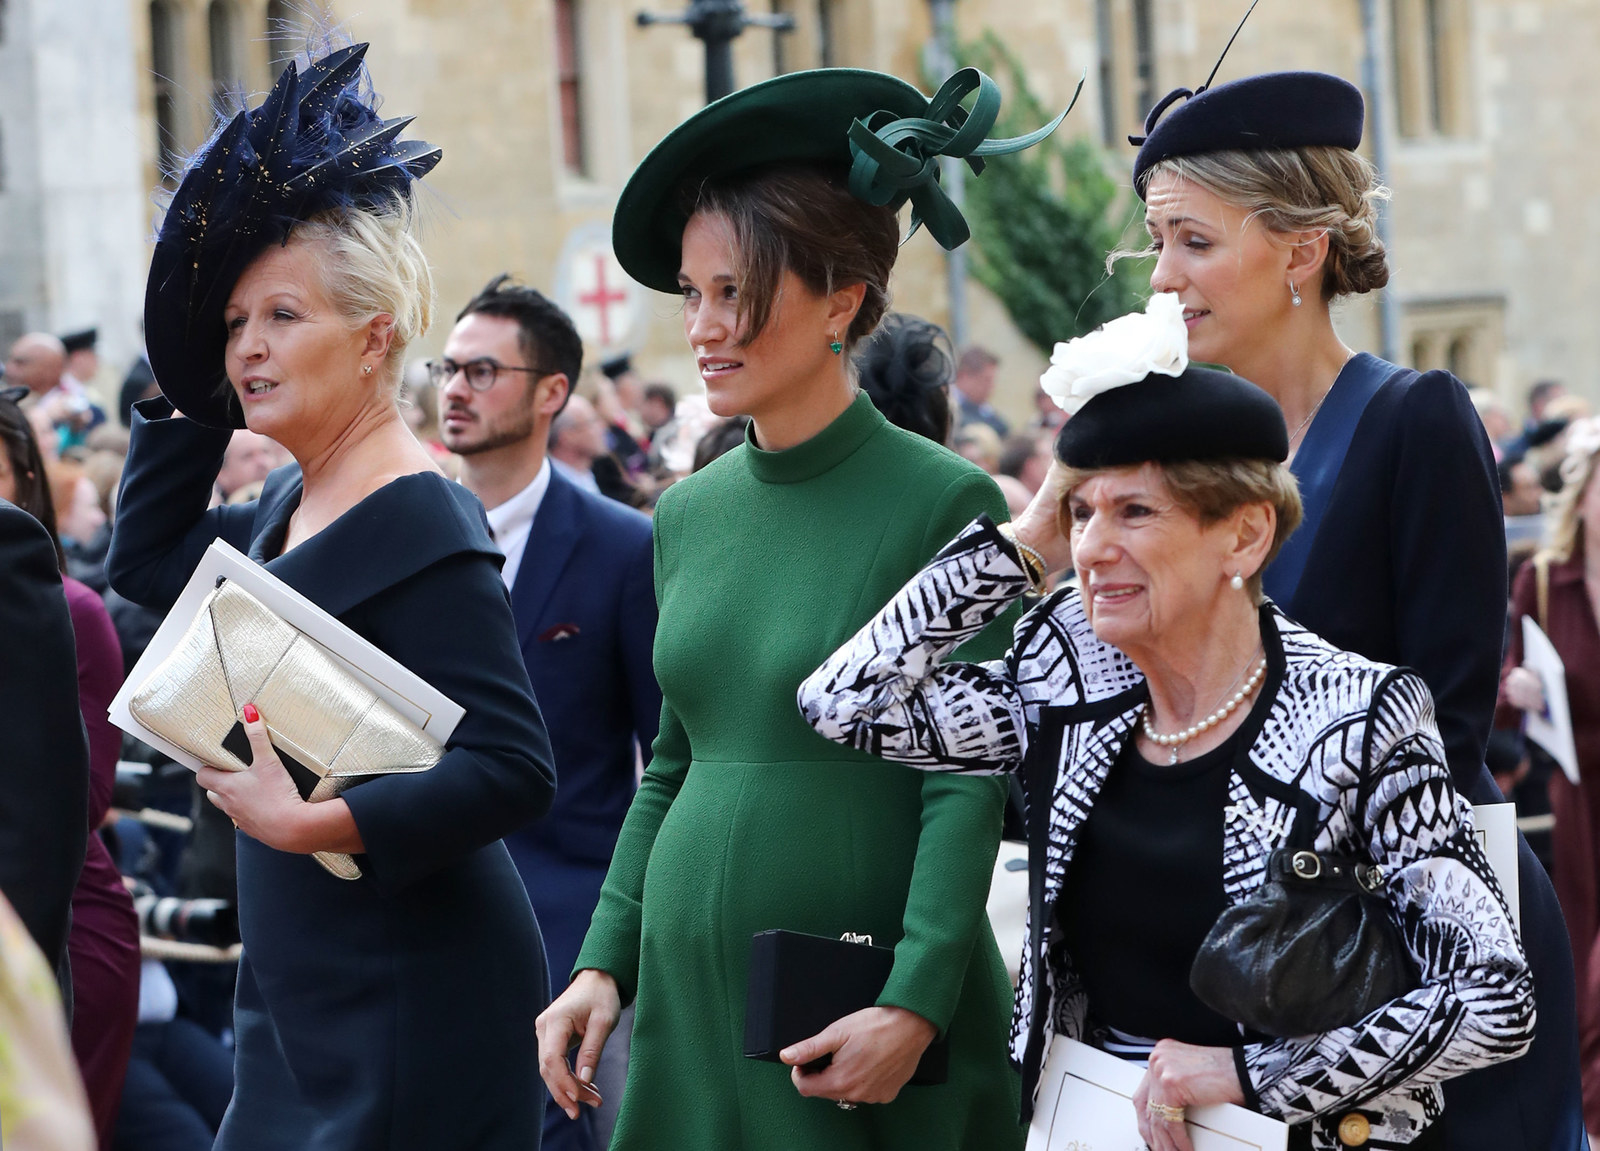 The Wildest Hats From the Royal Wedding